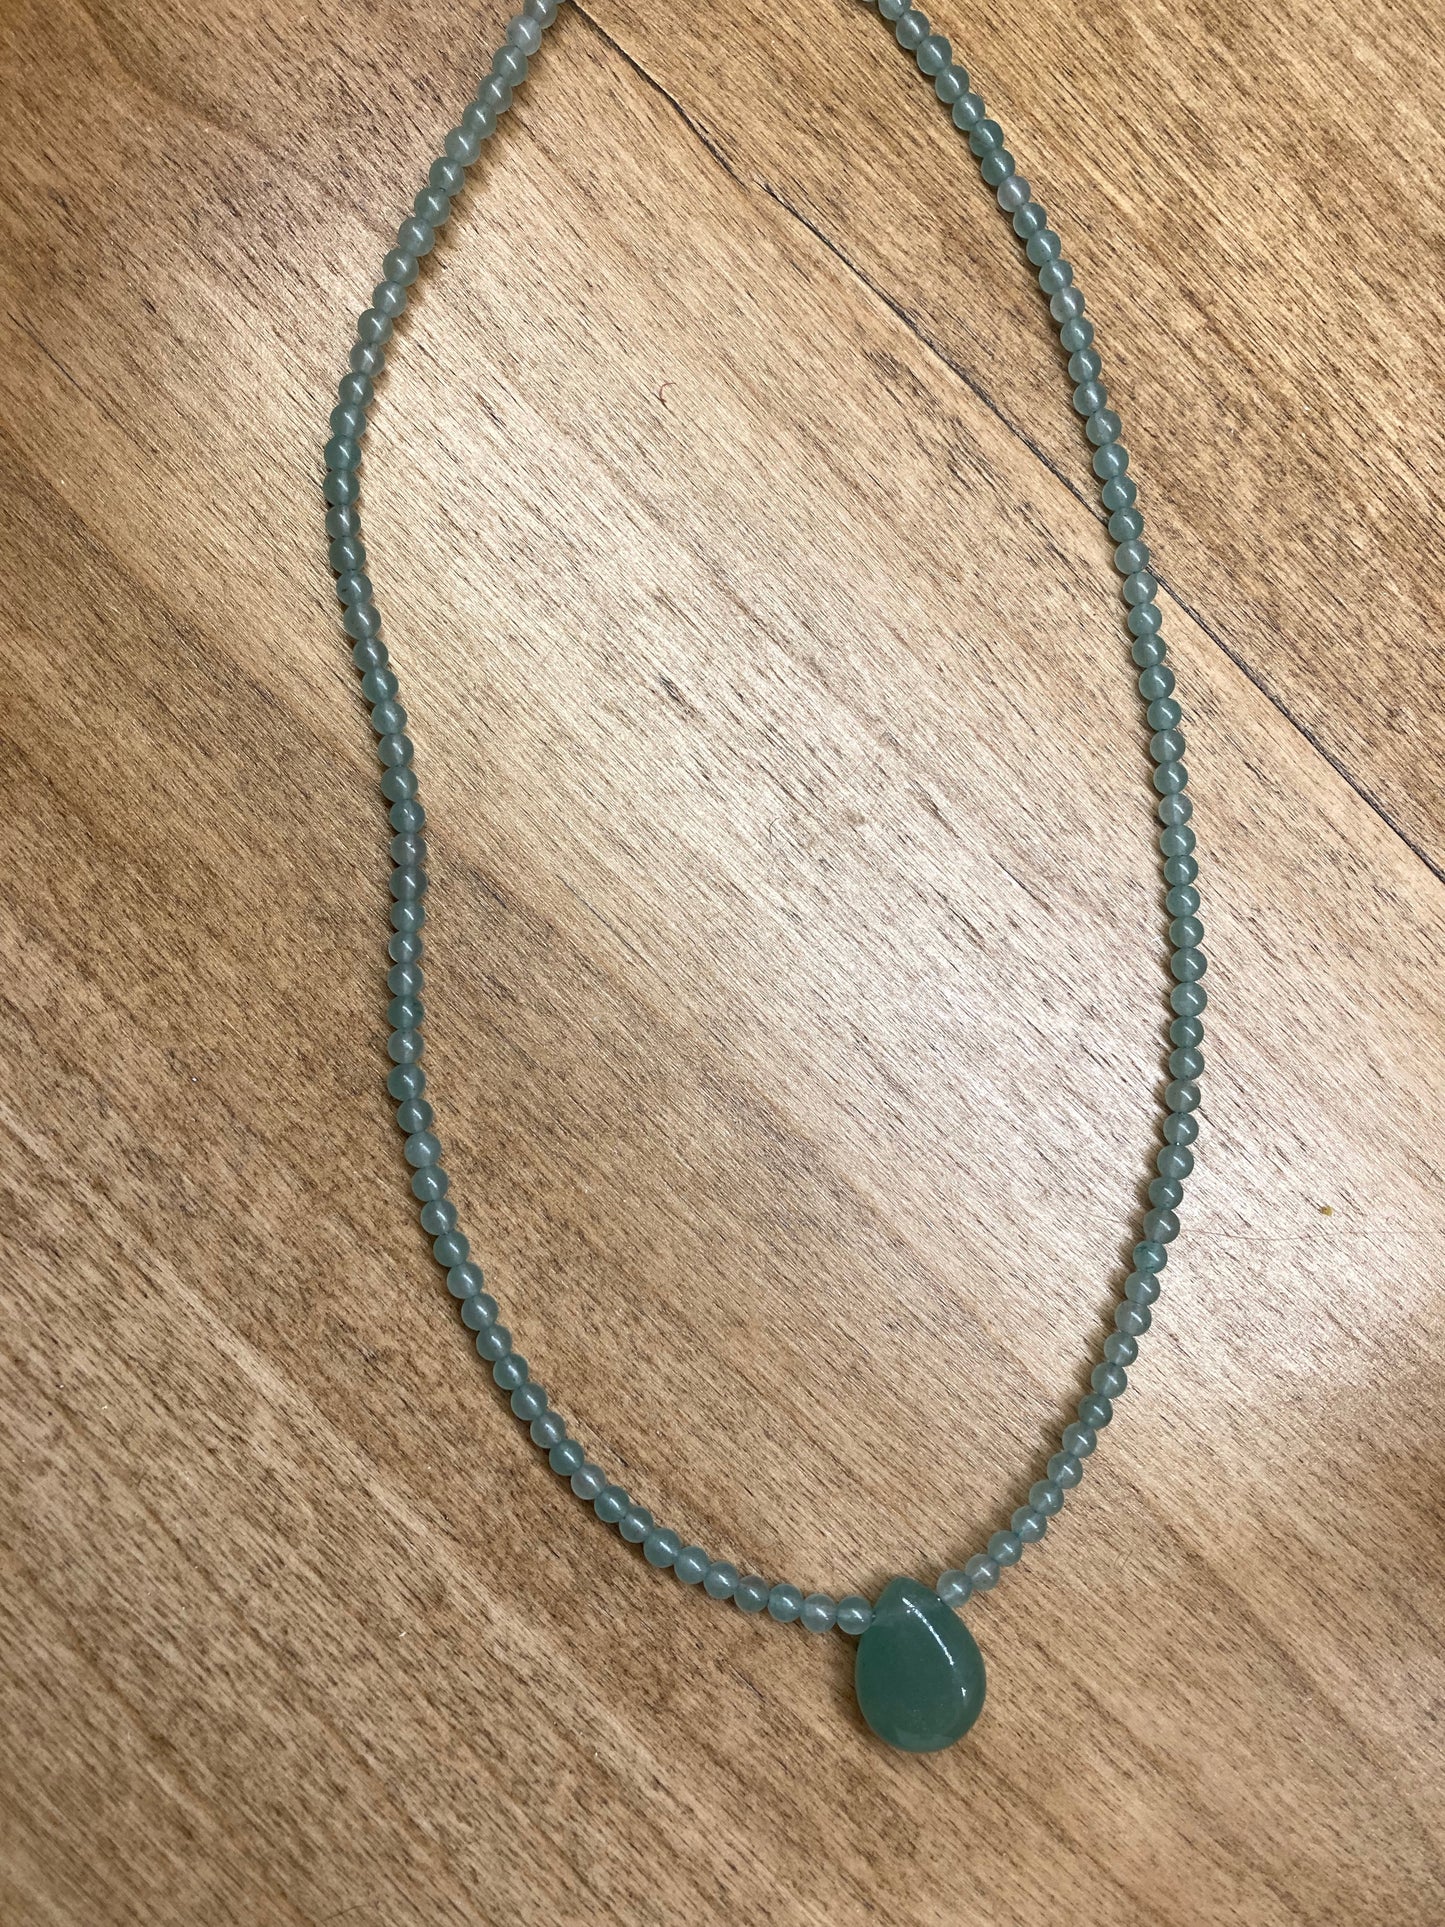 Seeds and Stones - Green Adventurine Necklace